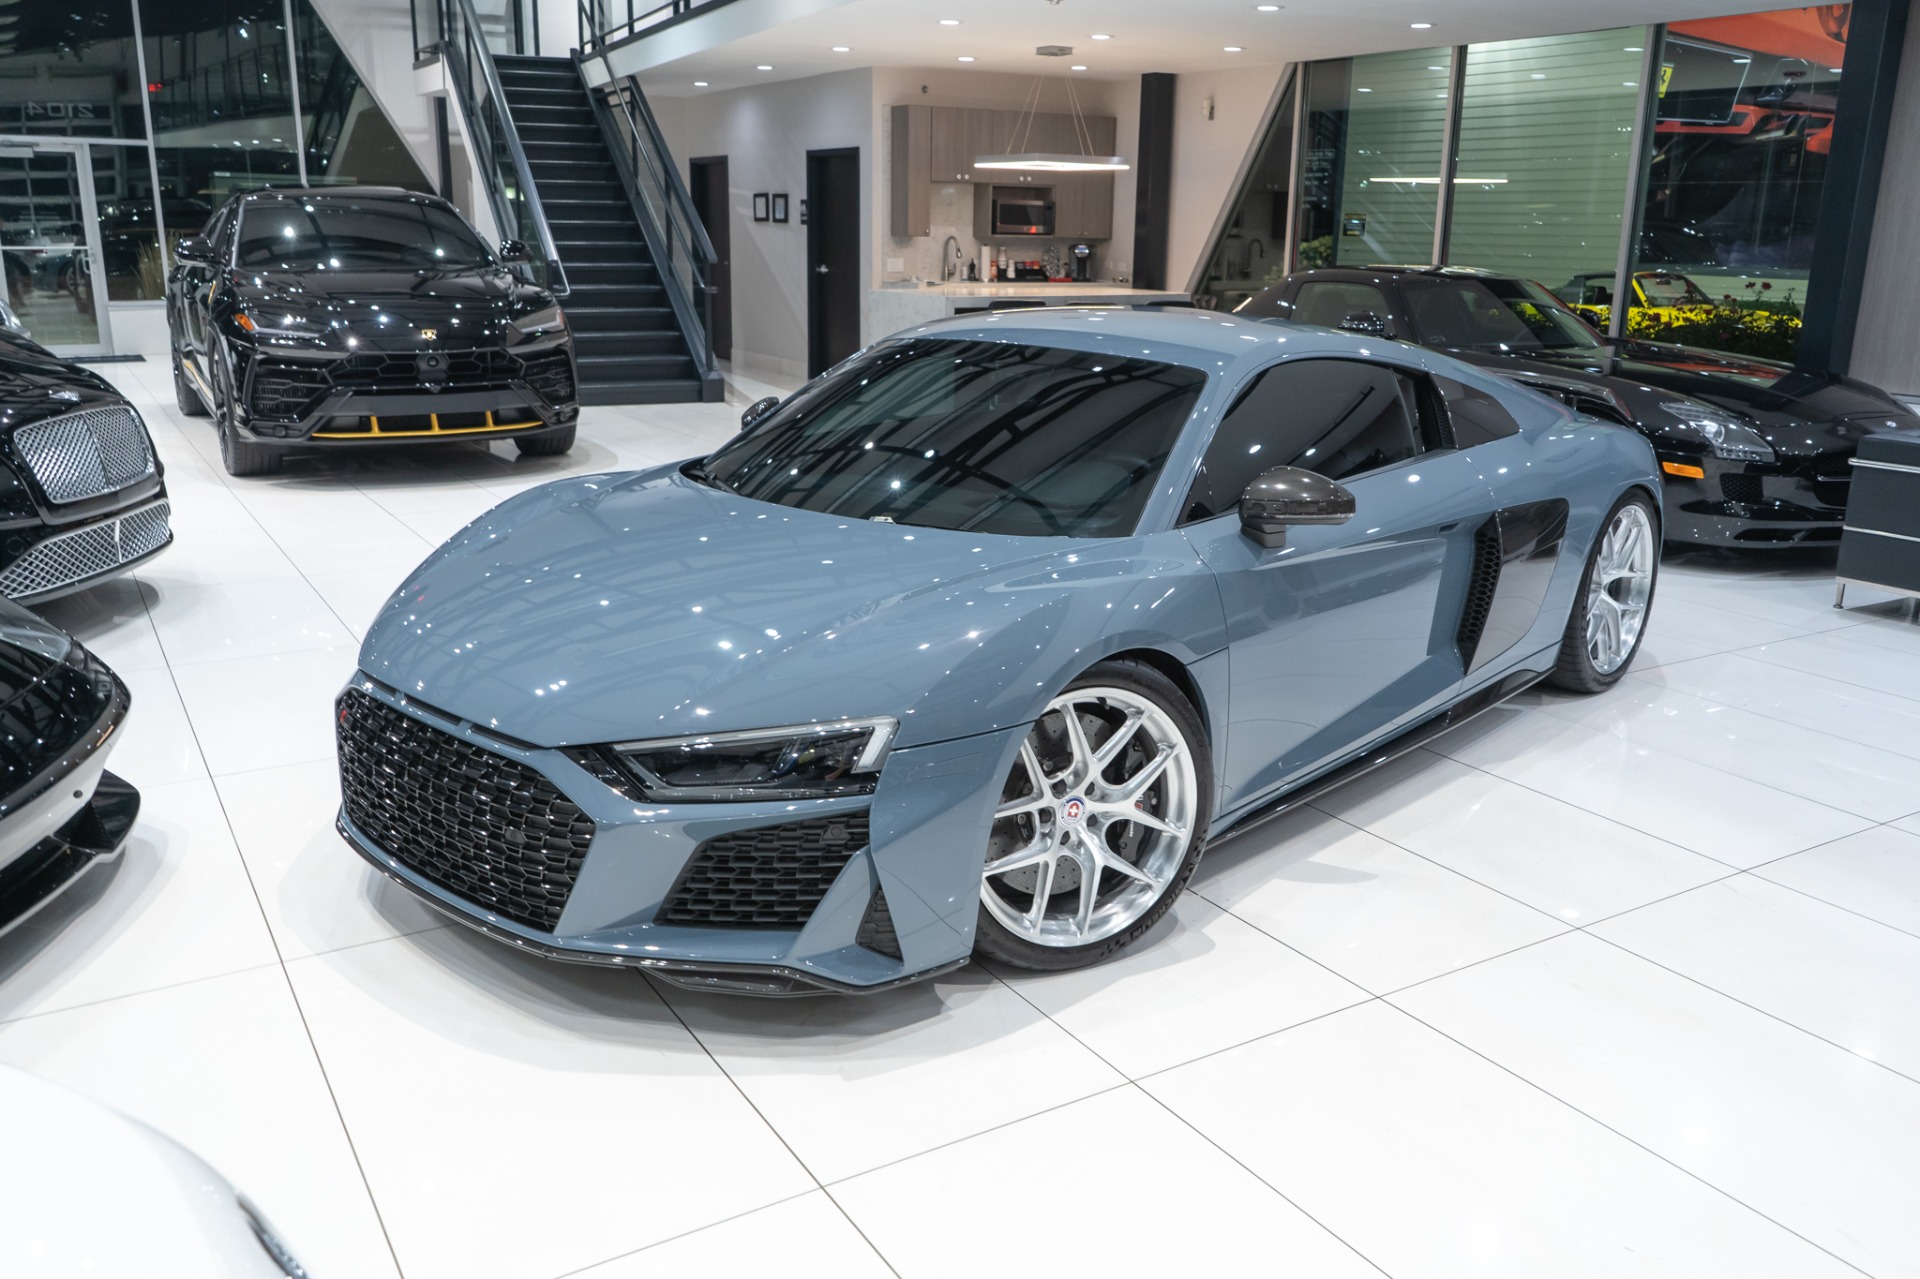 Used-2020-Audi-R8-52-quattro-V10-performance-VF-SUPERCHARGED-HREs-KW-COILOVERS-70k-UPGRAD